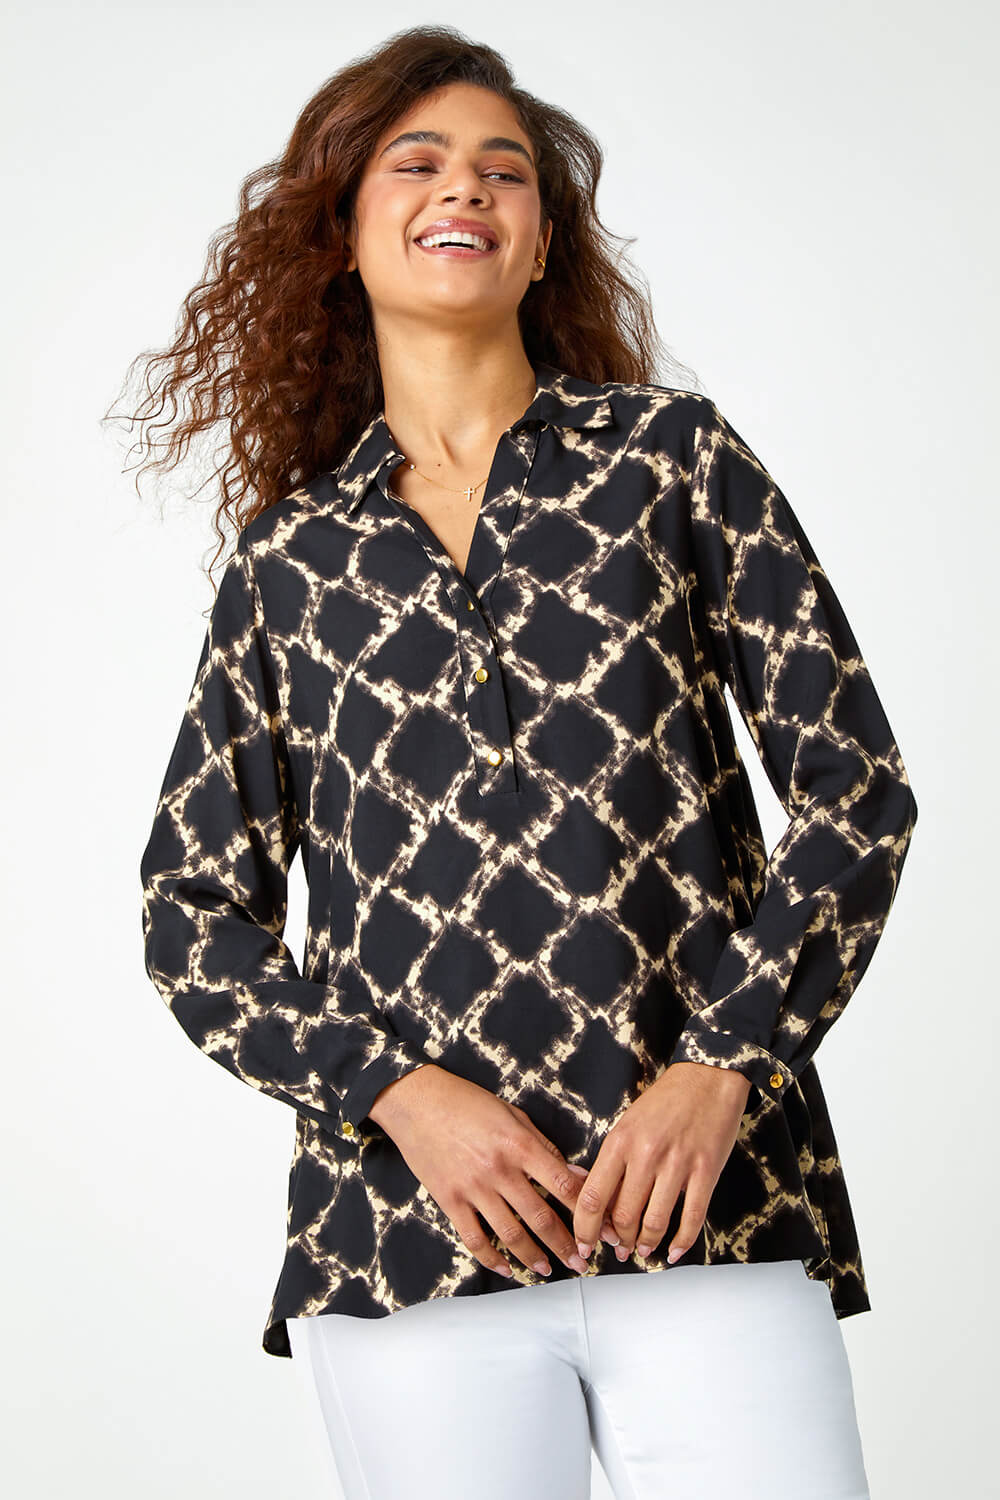 Black Chain Print Collared Top, Image 1 of 5